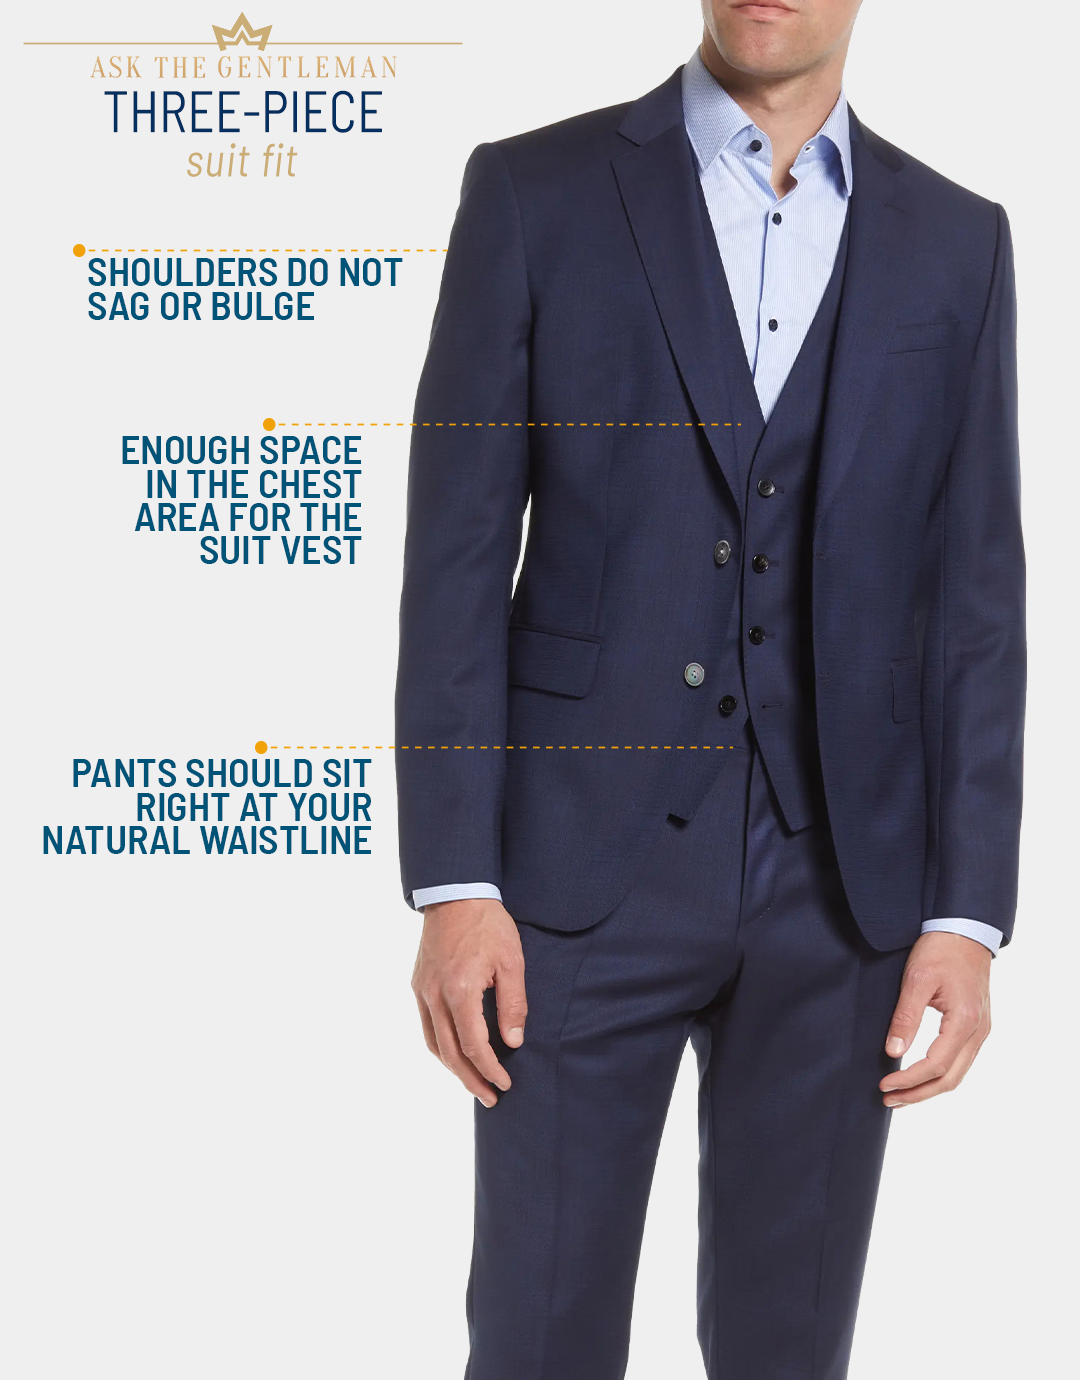 How should a three-piece suit fit